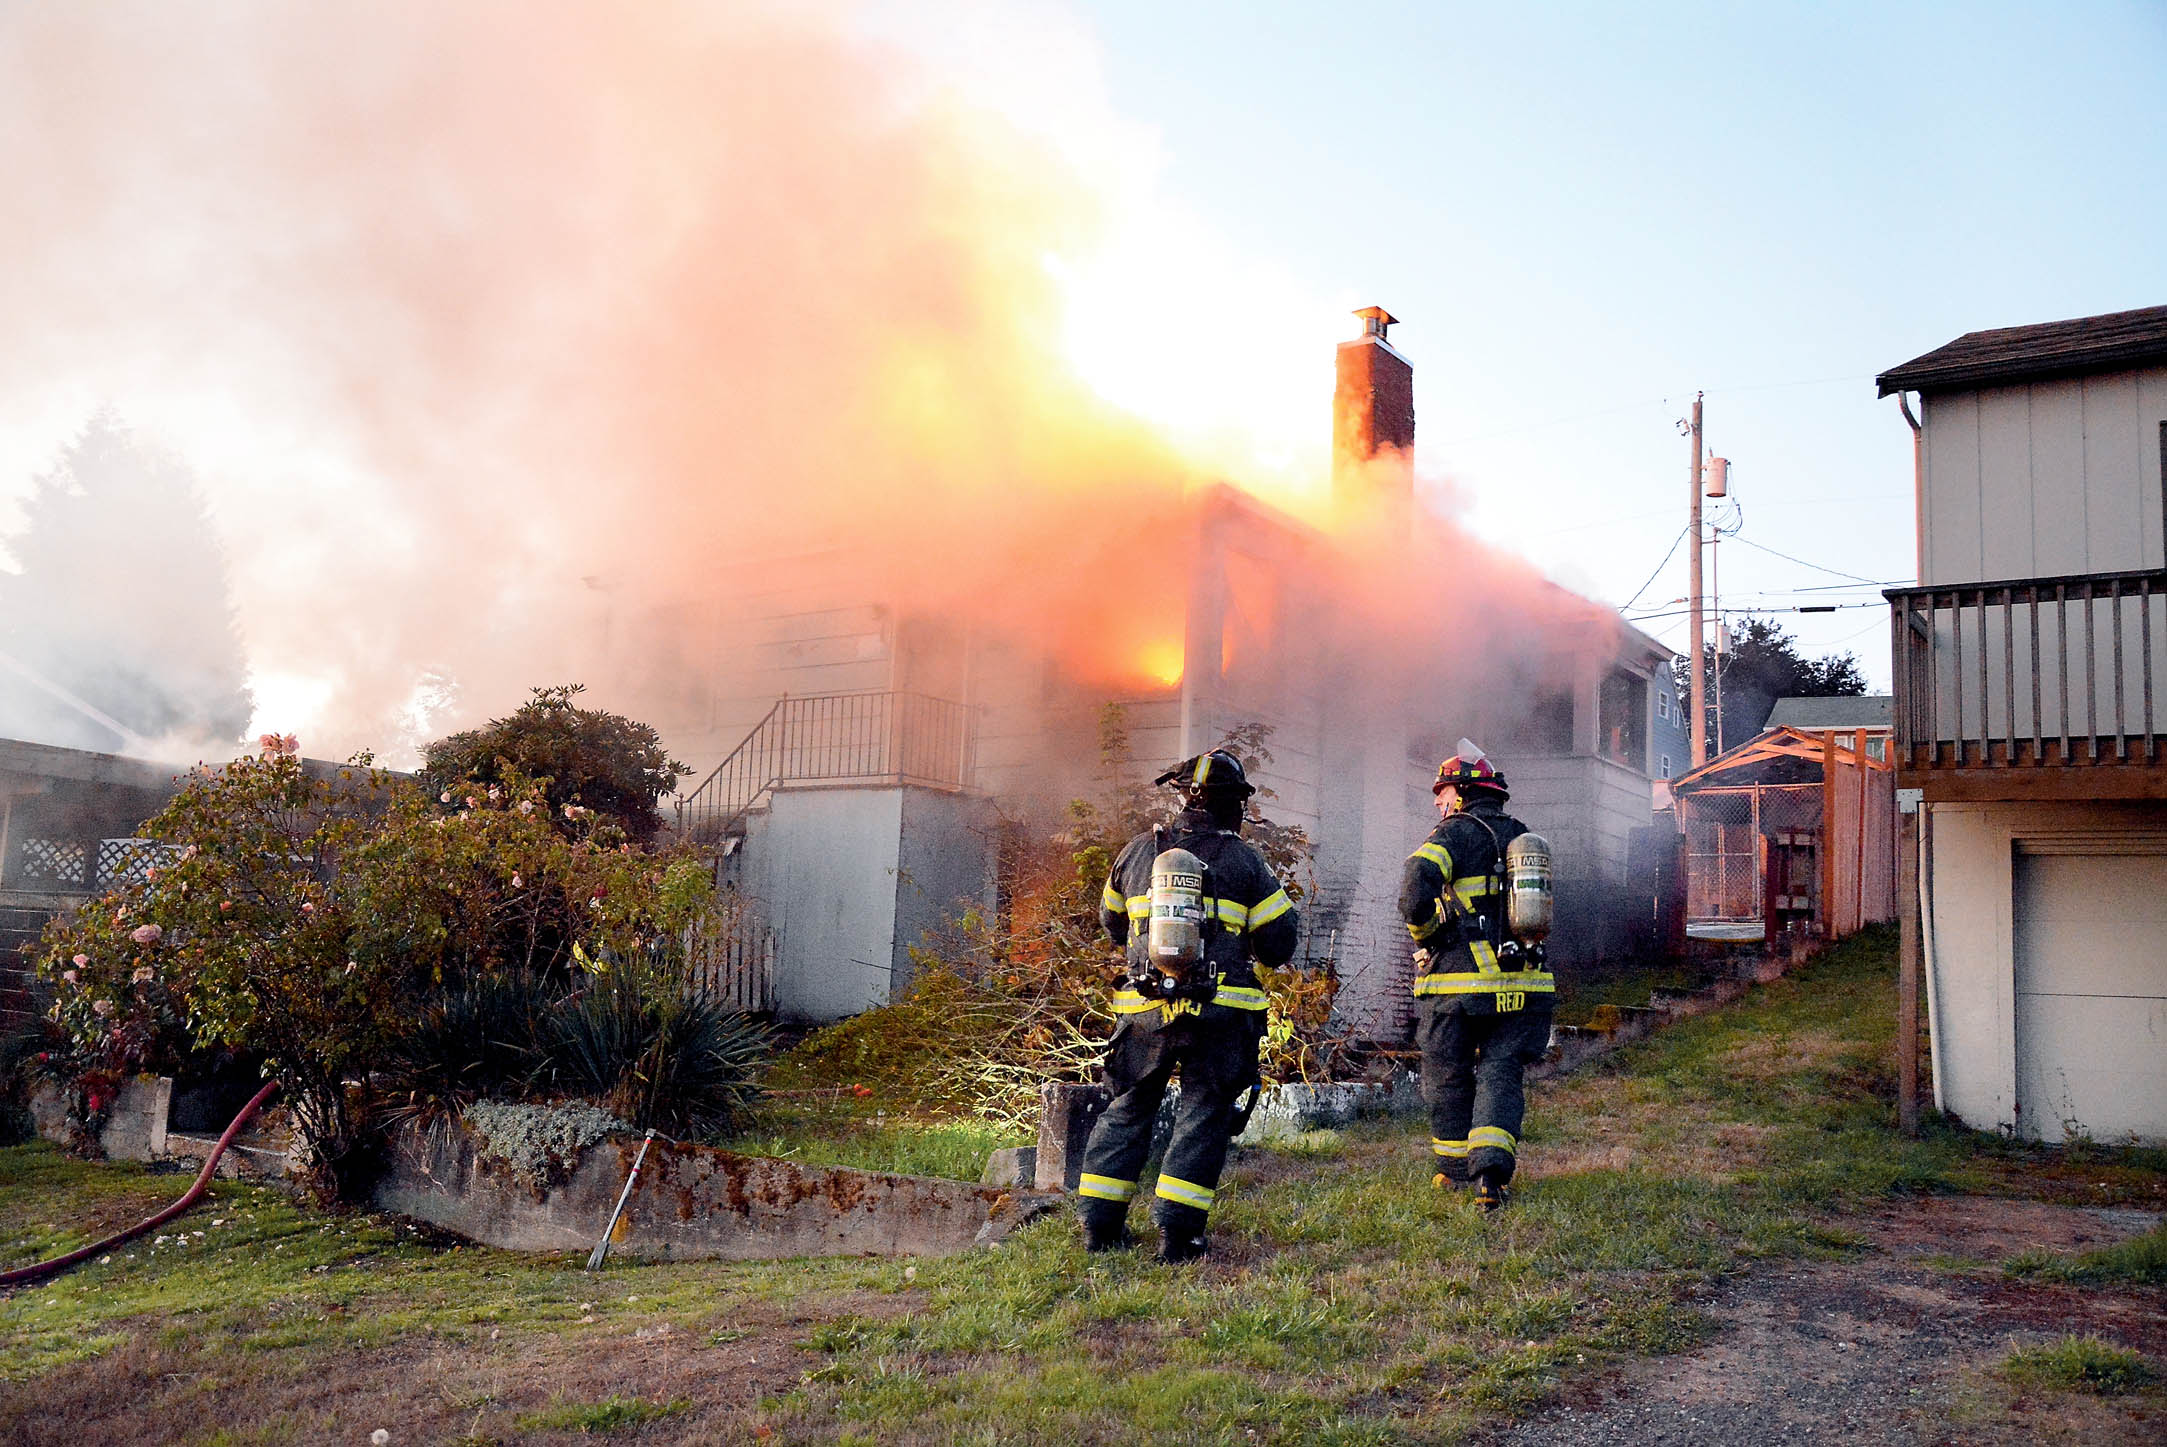 The Port Angeles Fire Department responded to this structure fire on East Lopez Avenue early Friday. Jay Cline/Clallam County Fire District No. 2